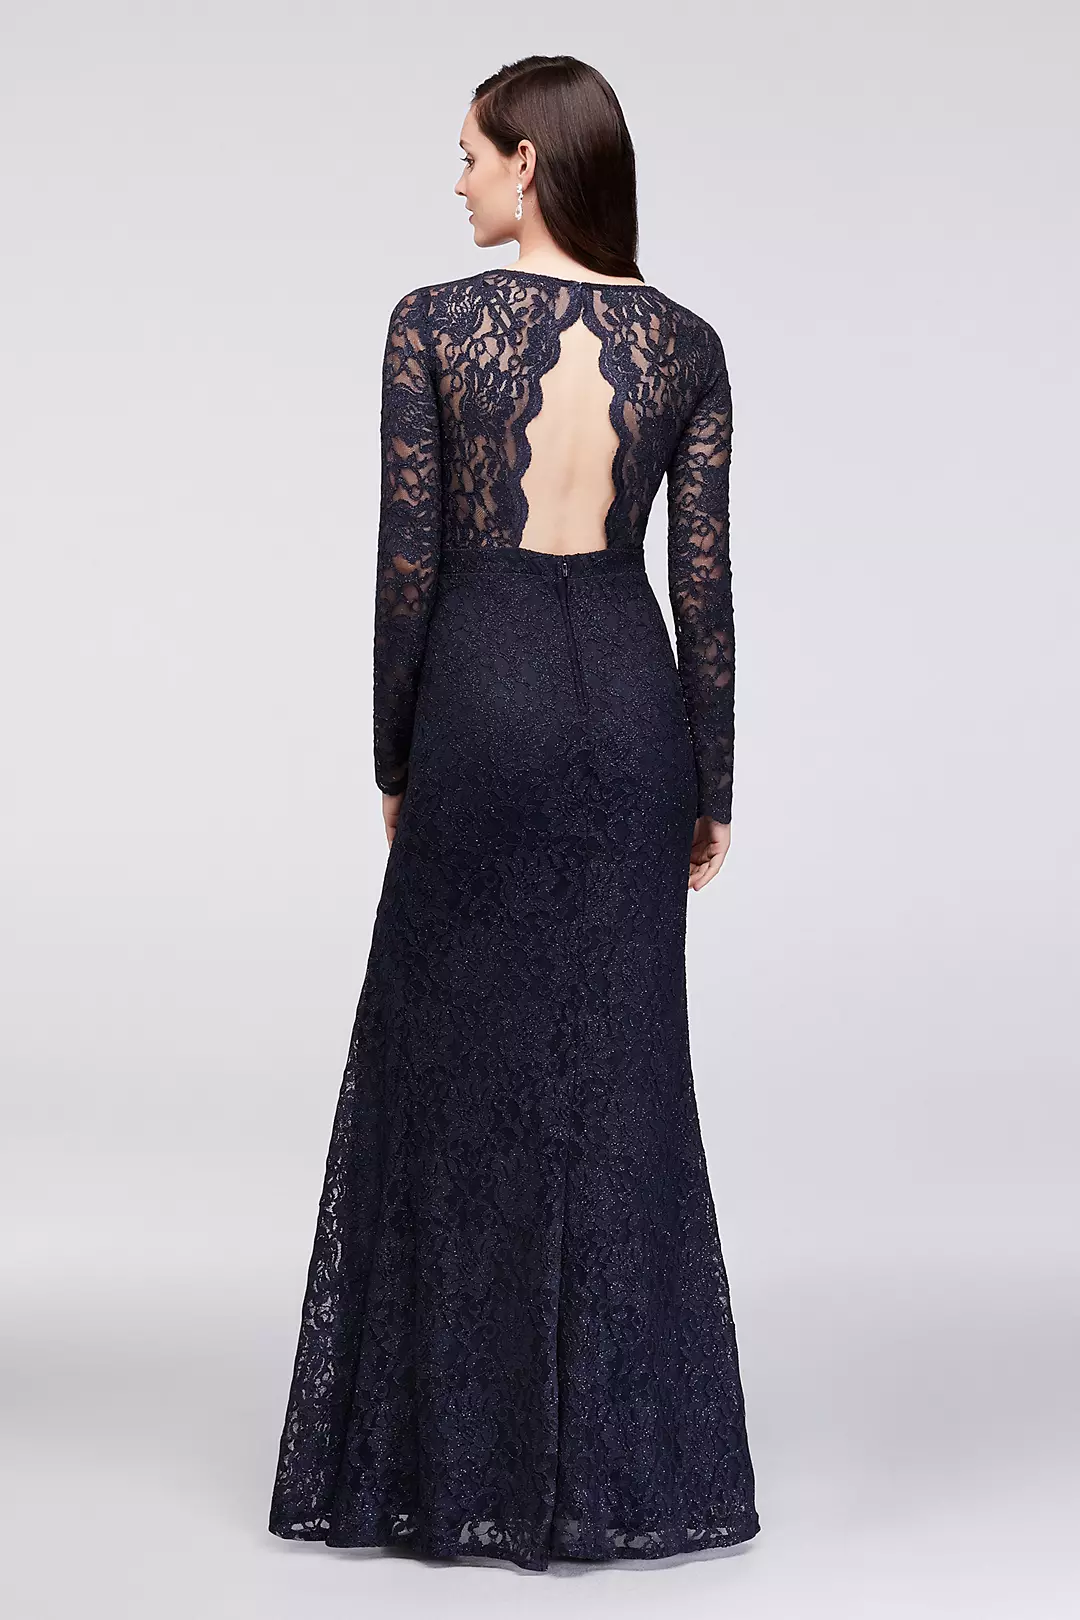 Glitter Lace Surplice Mermaid Gown with Keyhole  Image 2